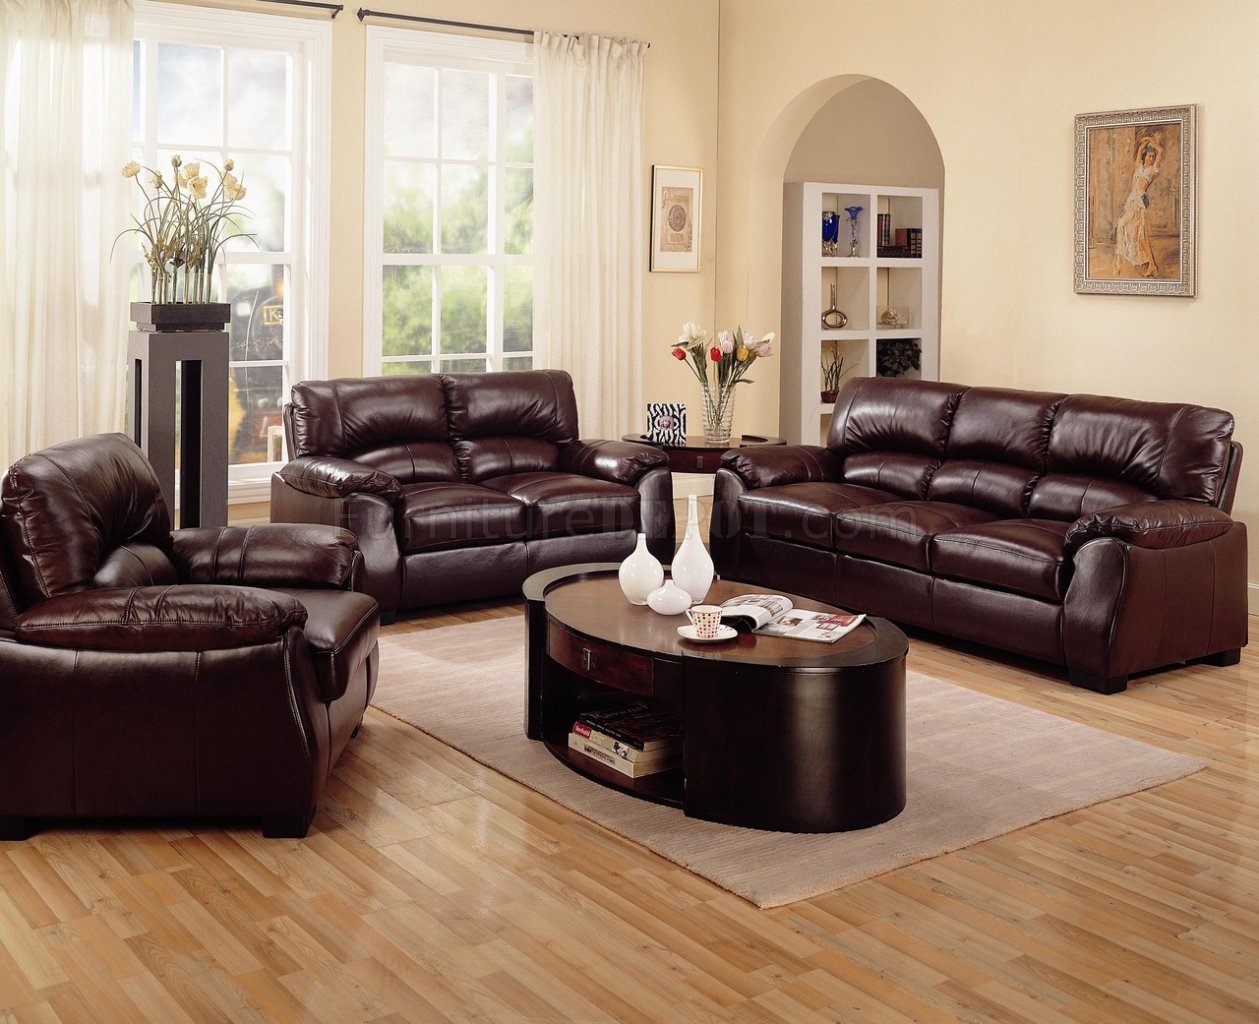 Rich Brown Leather Match Contemporary Living Room Sofa w/Options